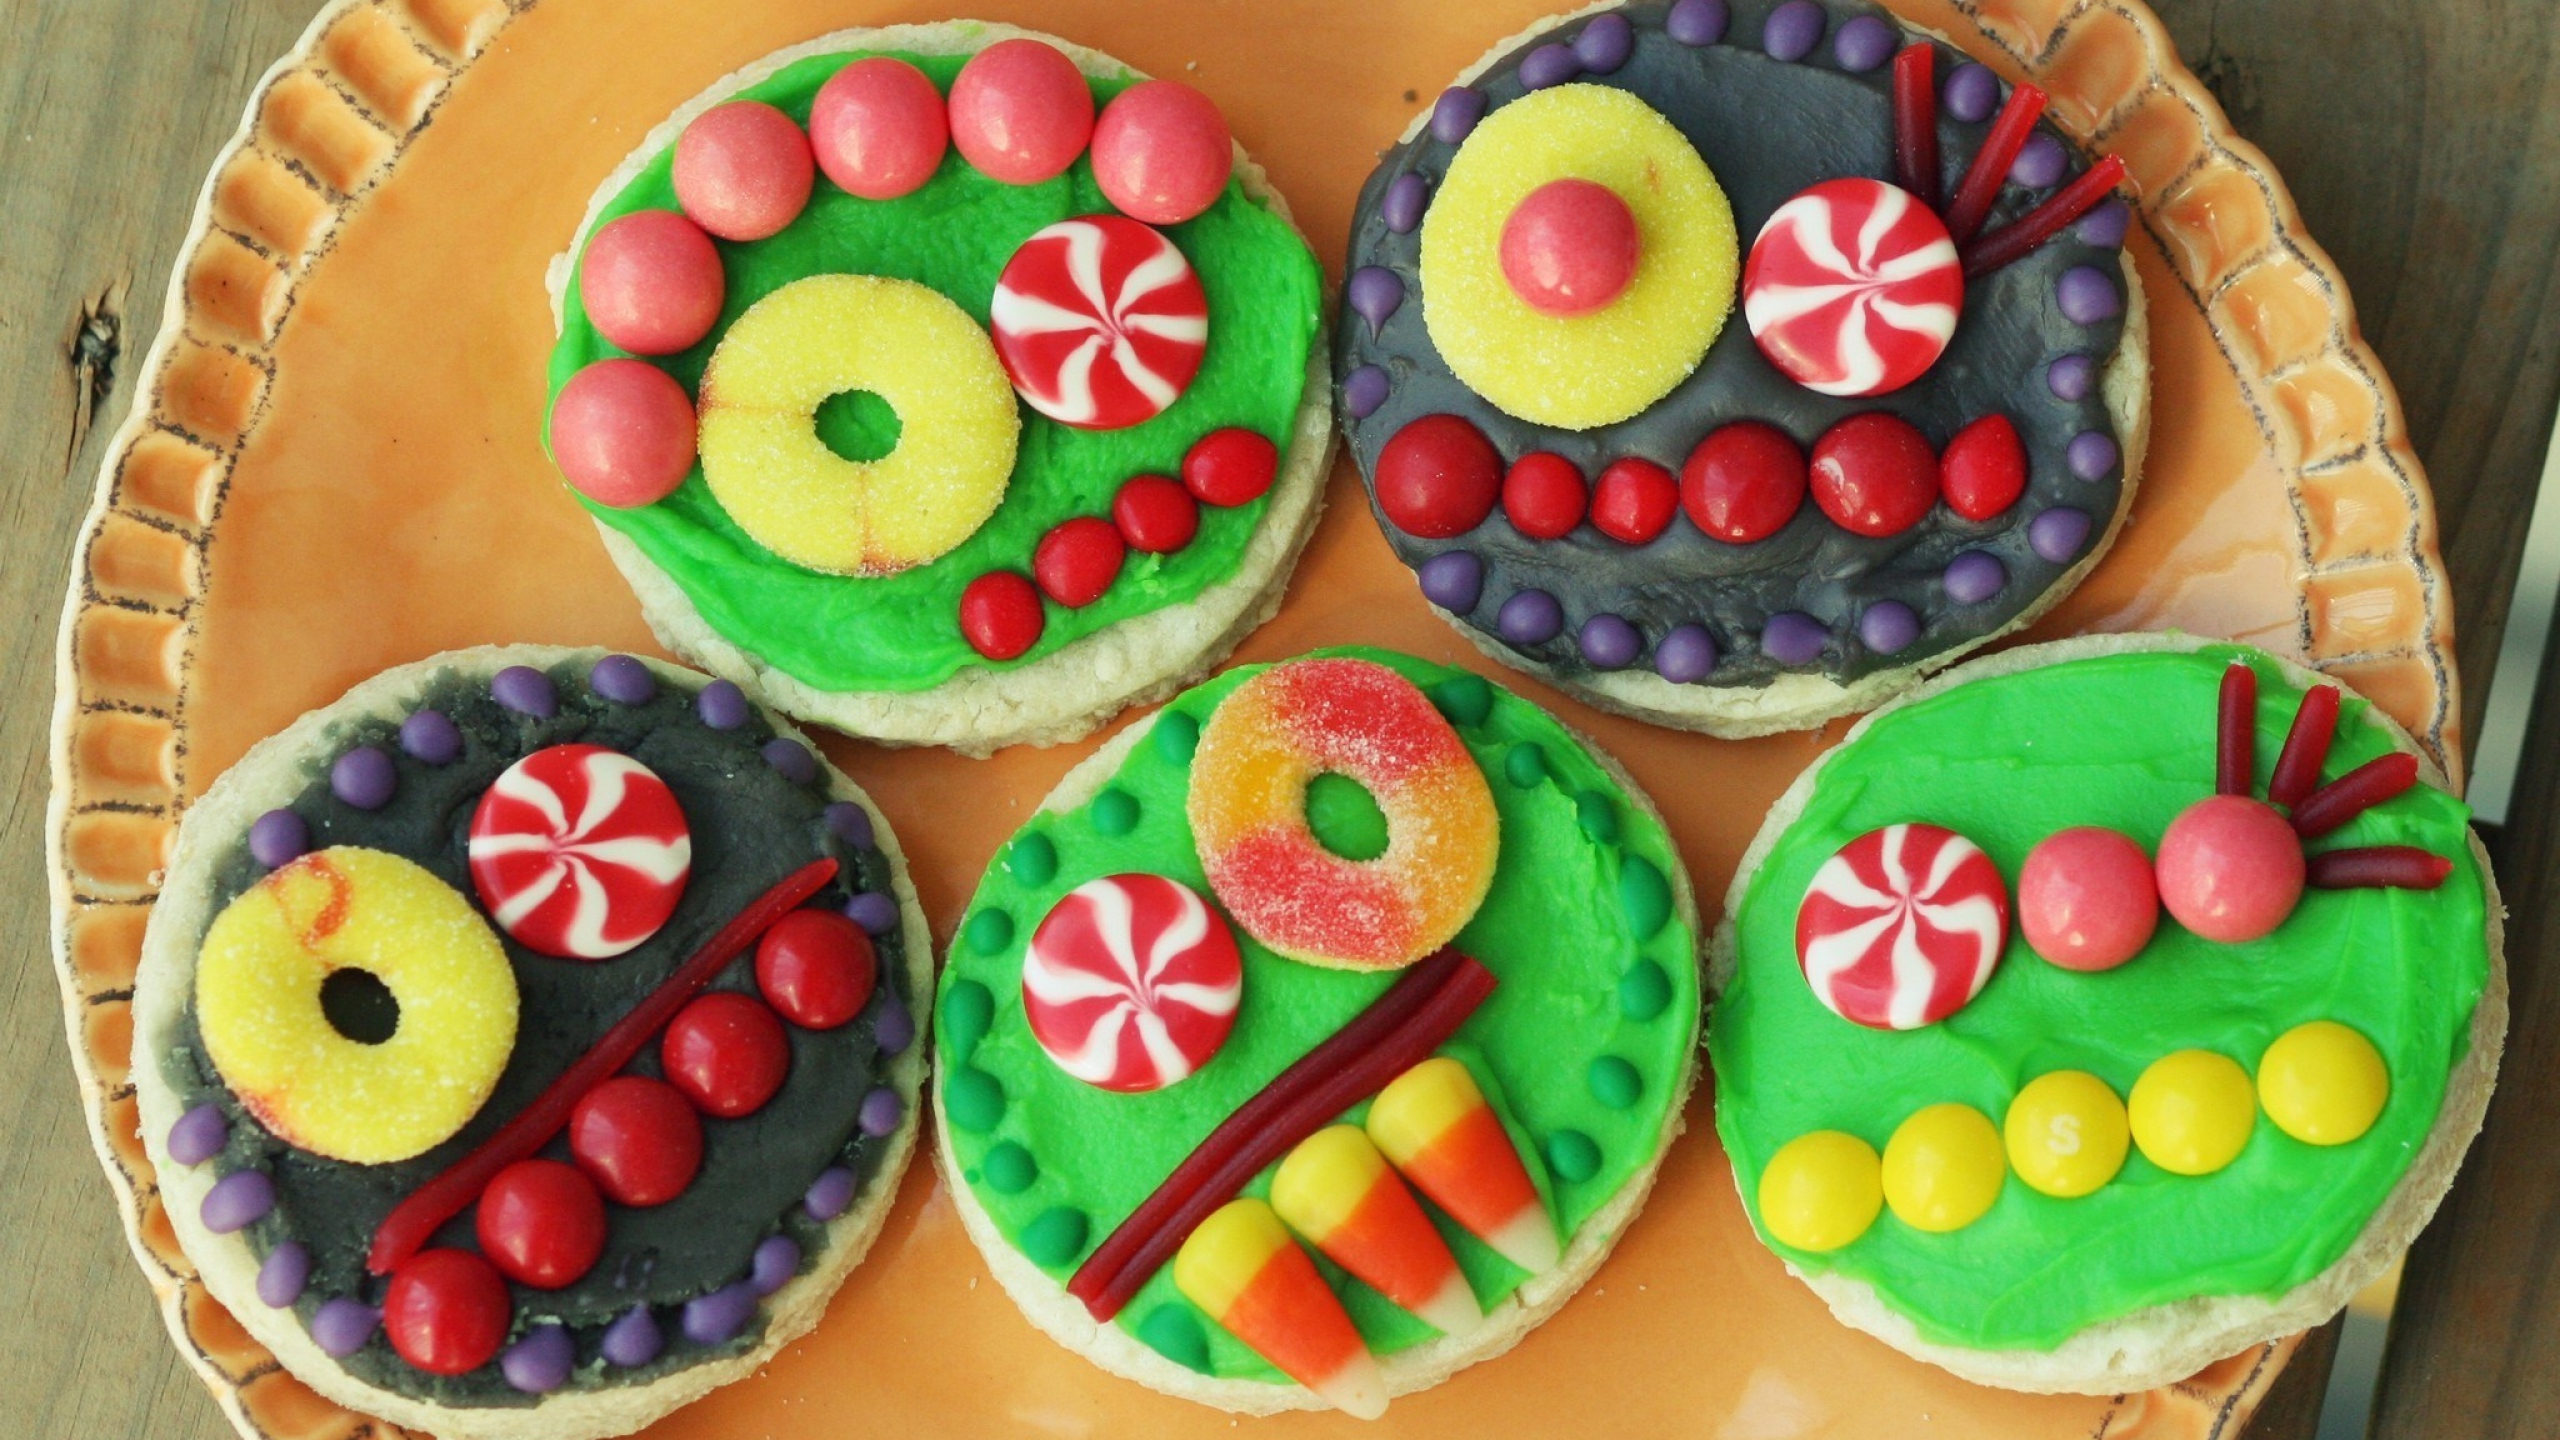 Colorful Candy Smiley Faces Funny Cookies Image